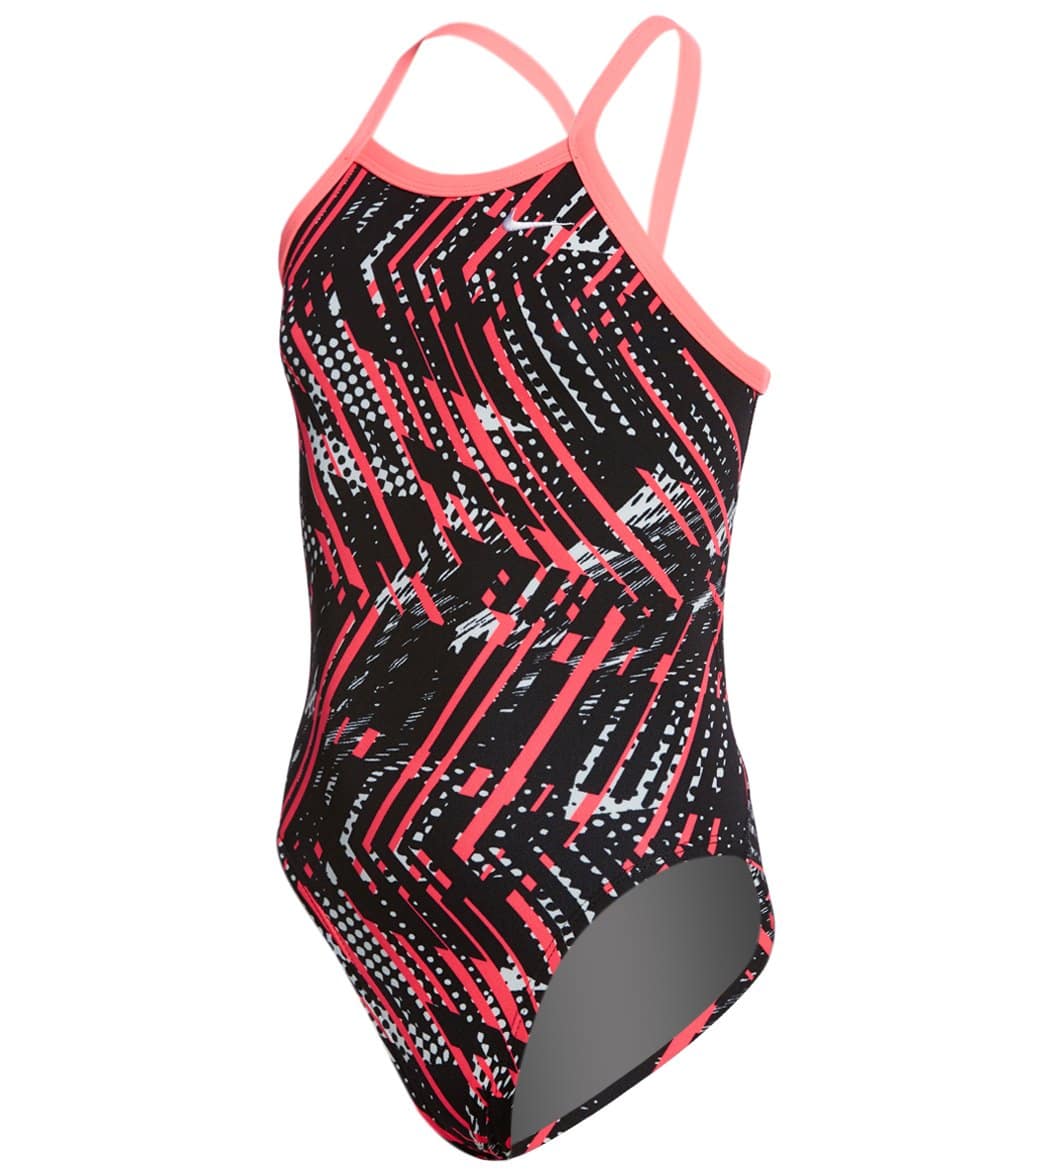 Nike Youth Shark Lingerie Tank One Piece Swimsuit - Racer Pink 20 Polyester/Pbt - Swimoutlet.com